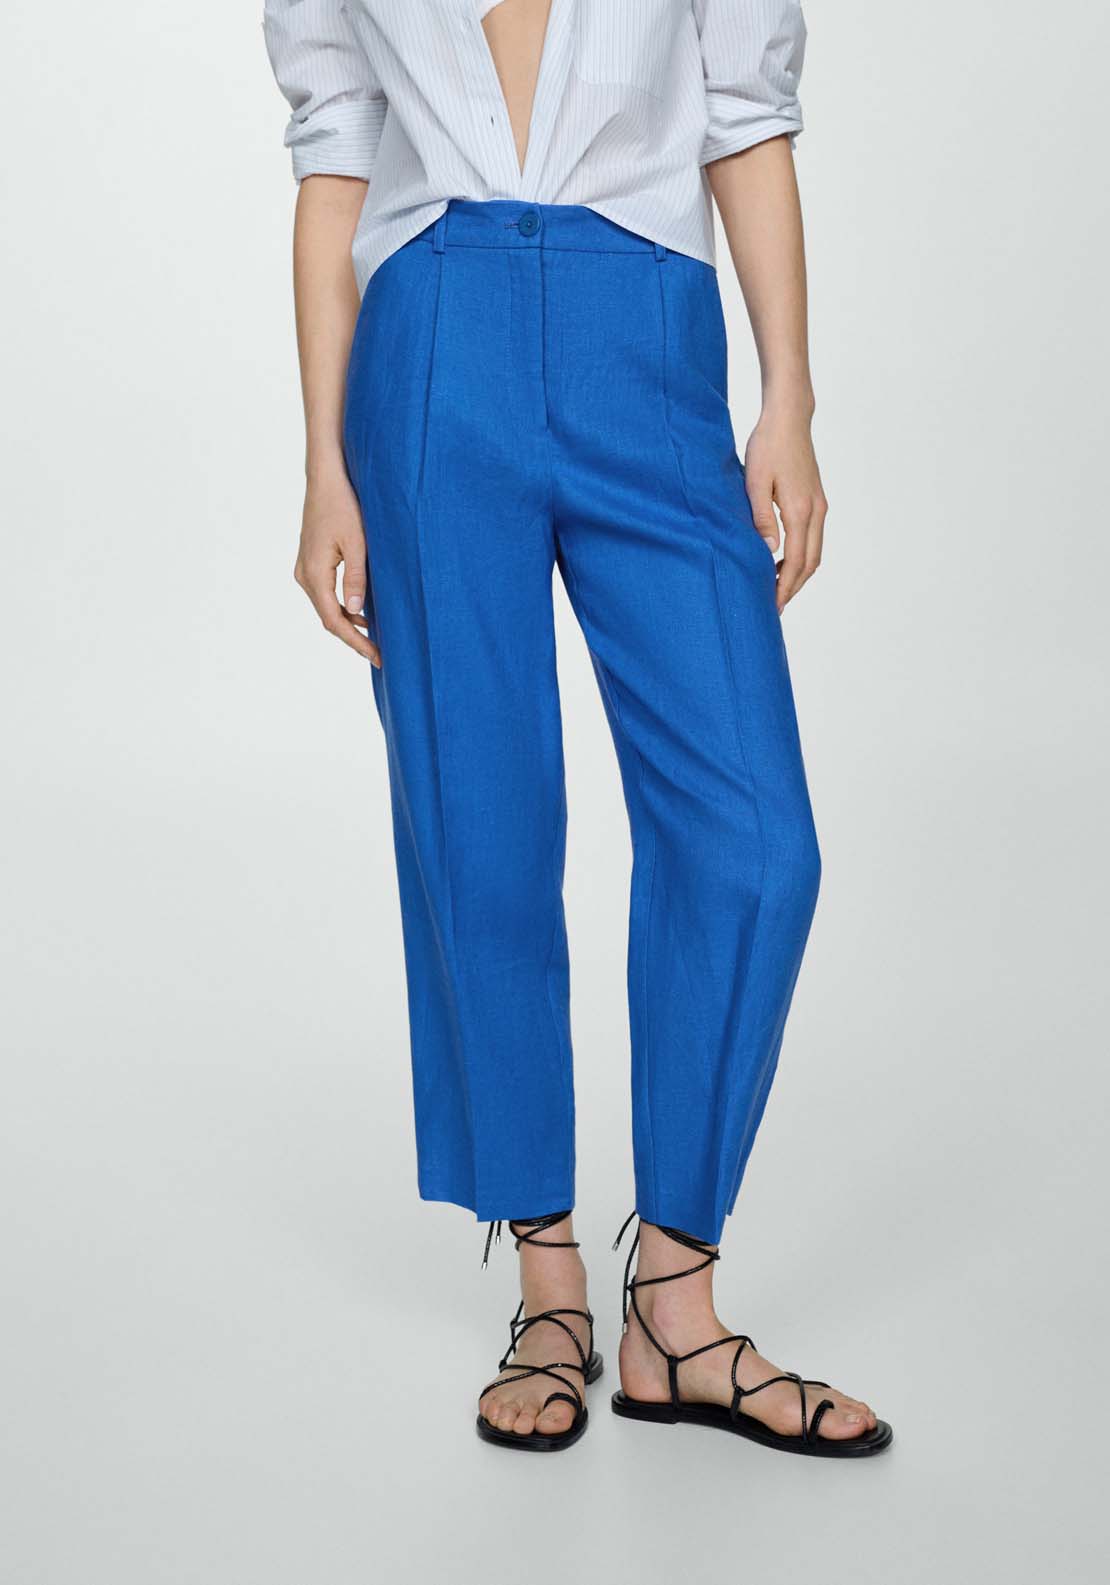 Mango 100% linen straight trousers - Blue 1 Shaws Department Stores